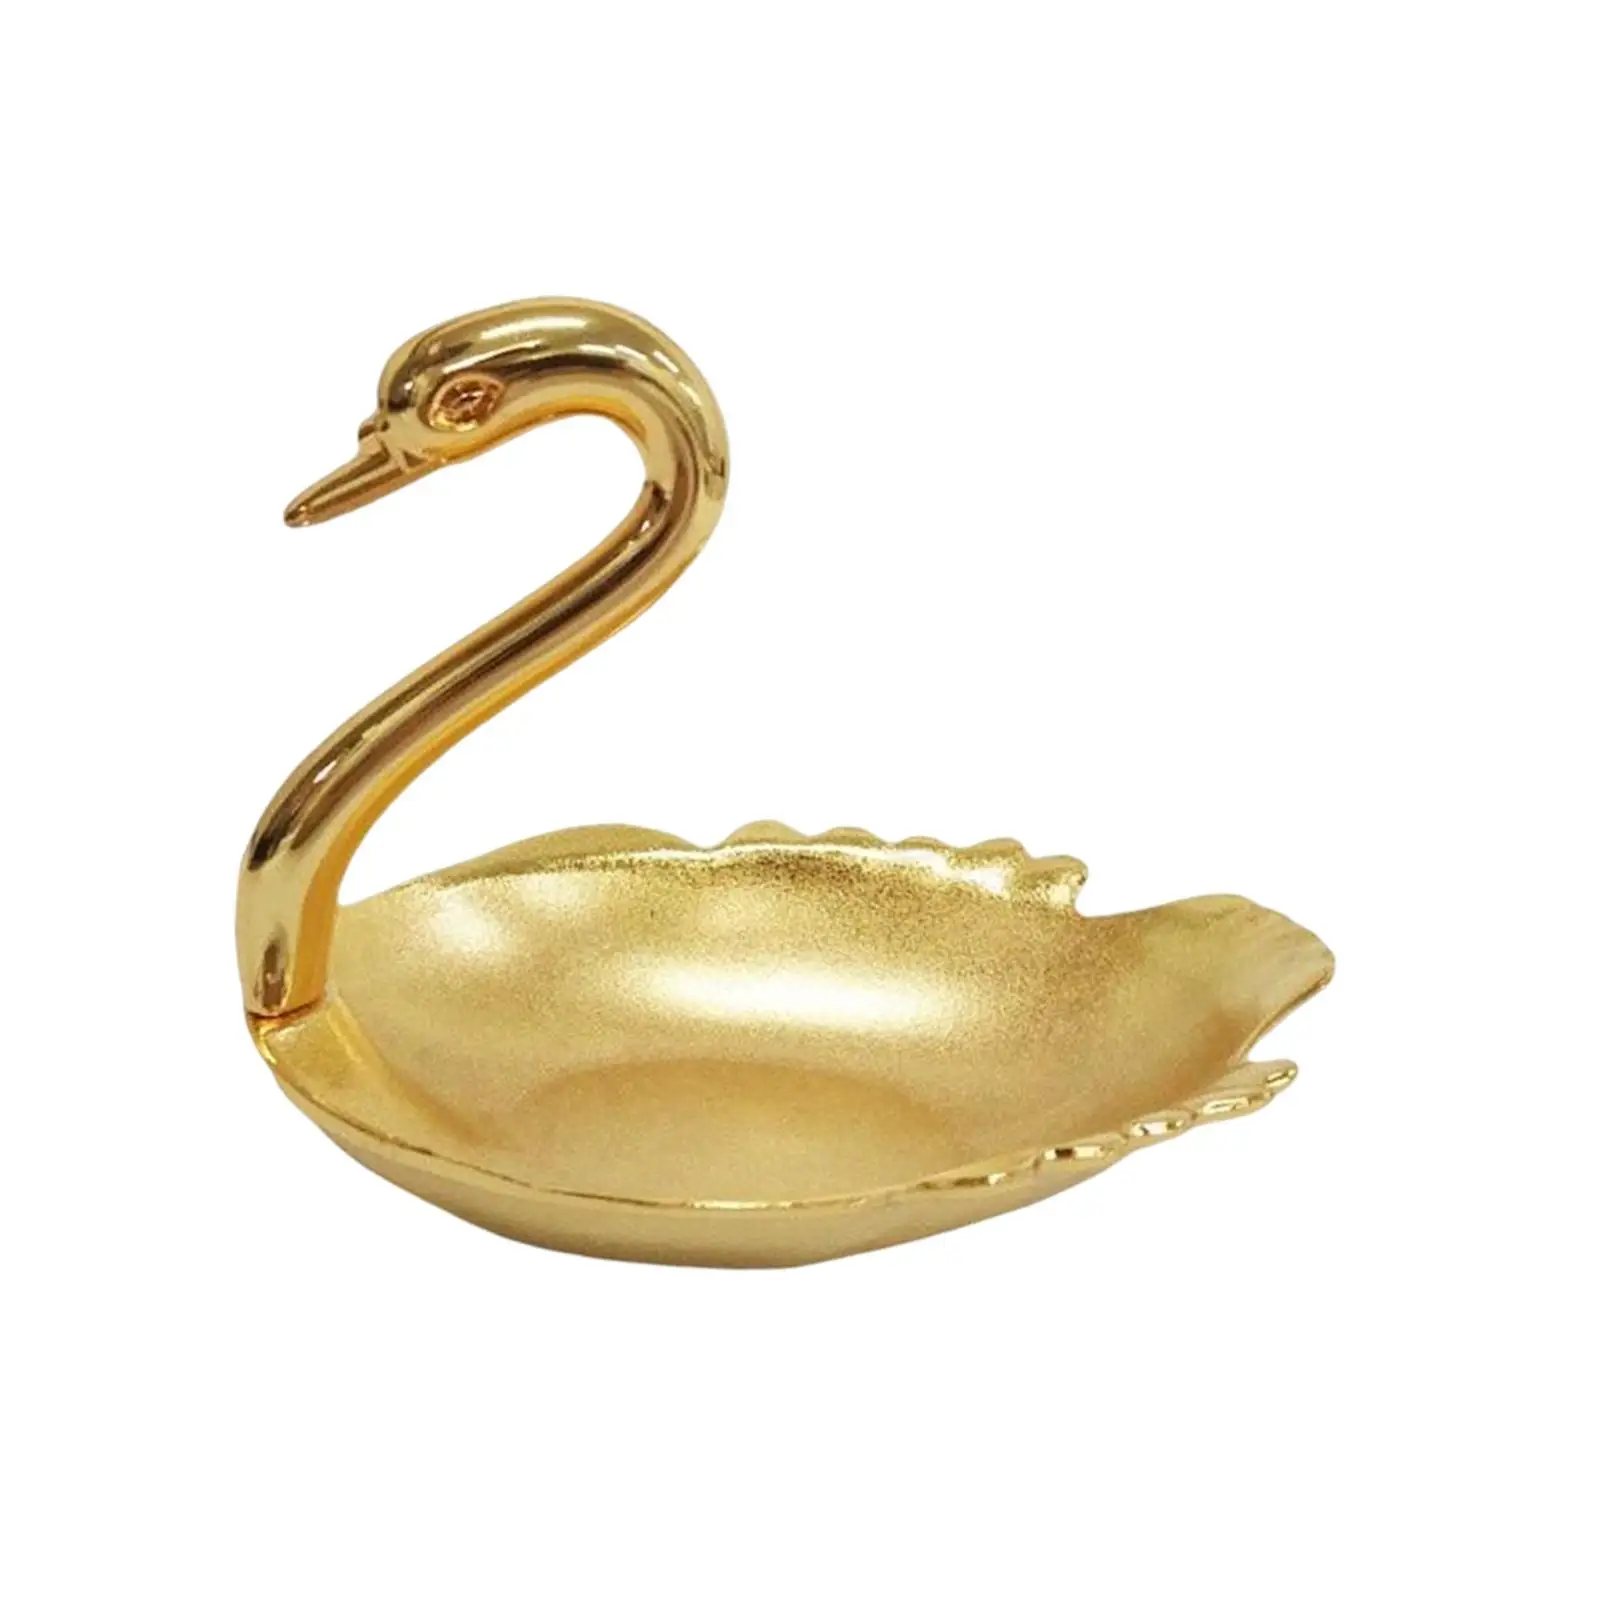 Metal Swan Shape Fruits Serving Tray Cookie Storage Bowl Candy Dish Dessert Platter for Table Desk Bar Buffet Decoration